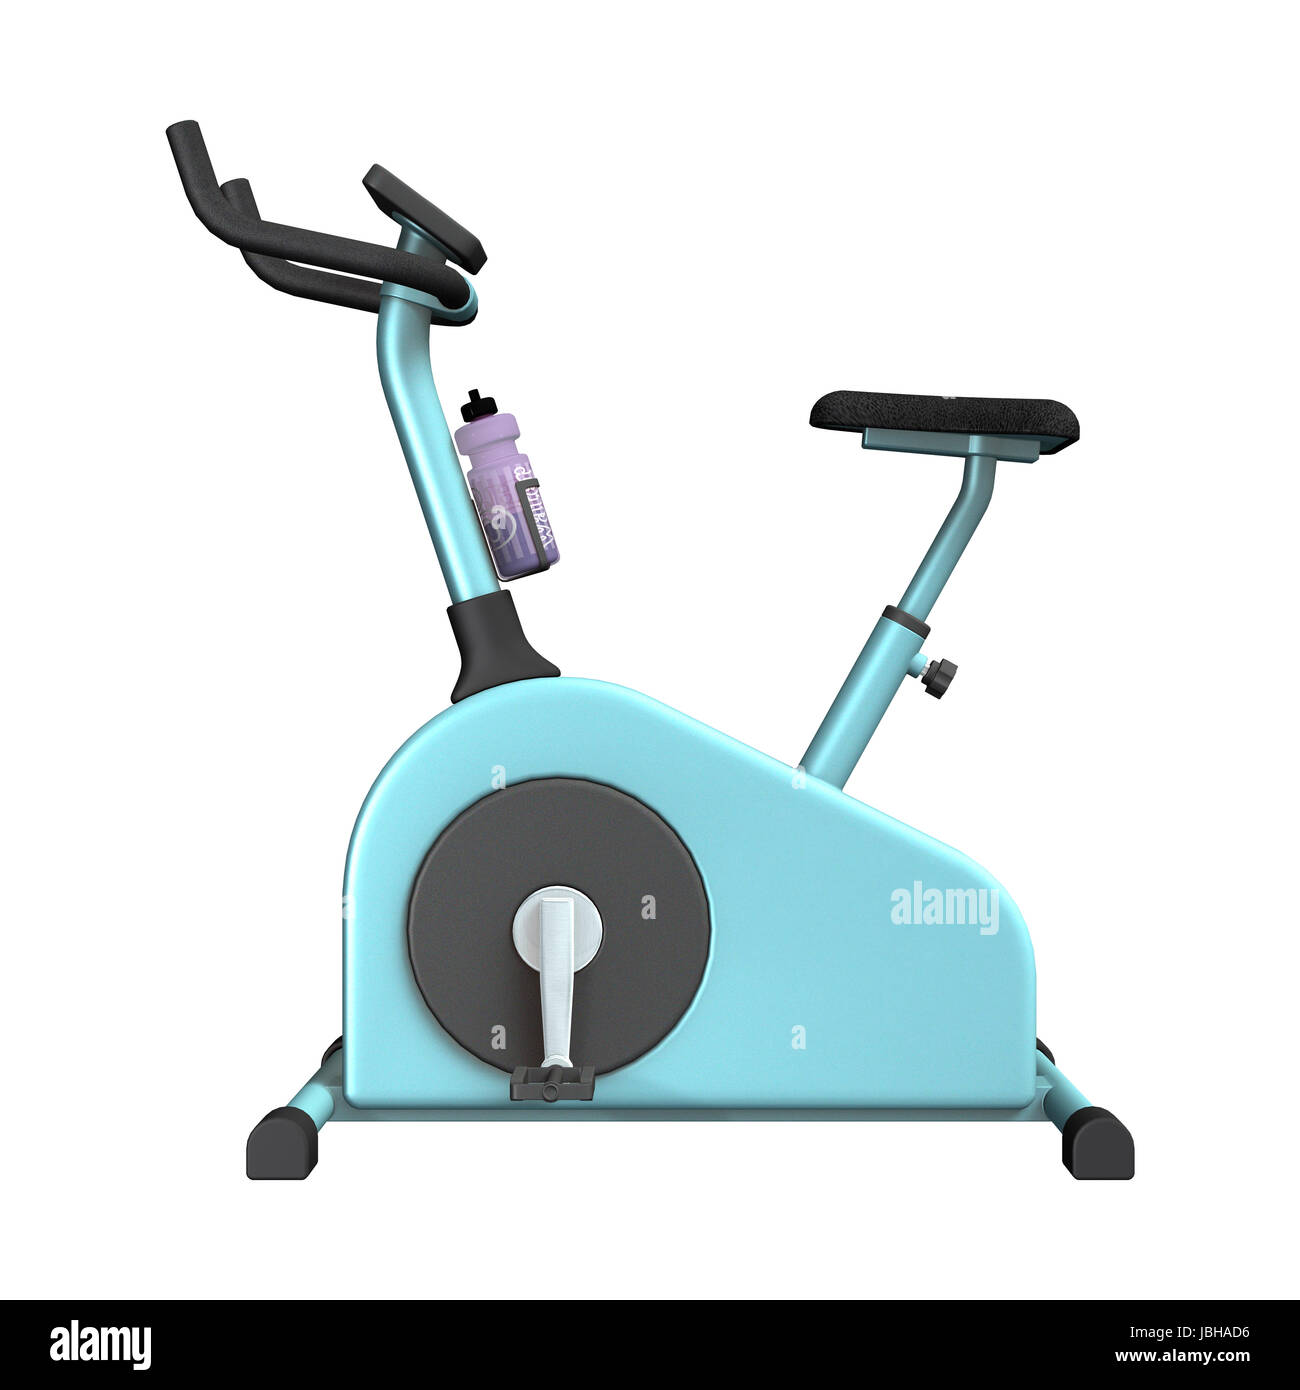 Hometrainer Cycling High Resolution Stock Photography and Images - Alamy